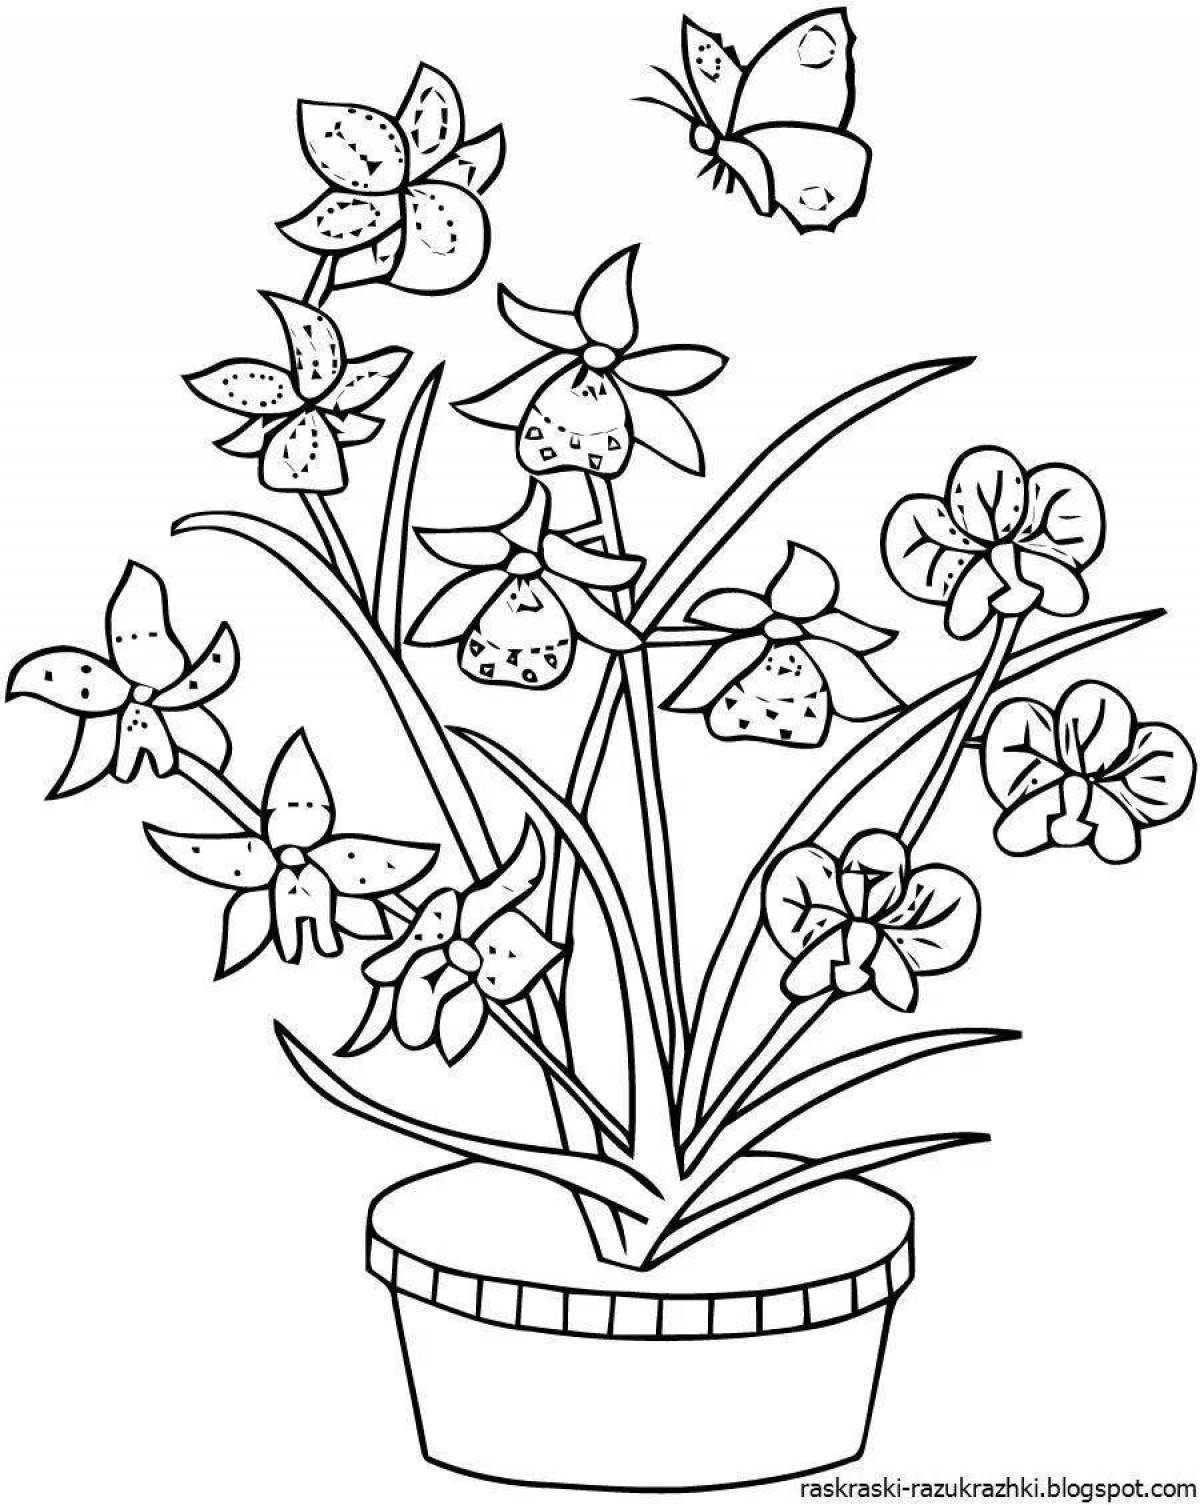 Coloring plants for kids